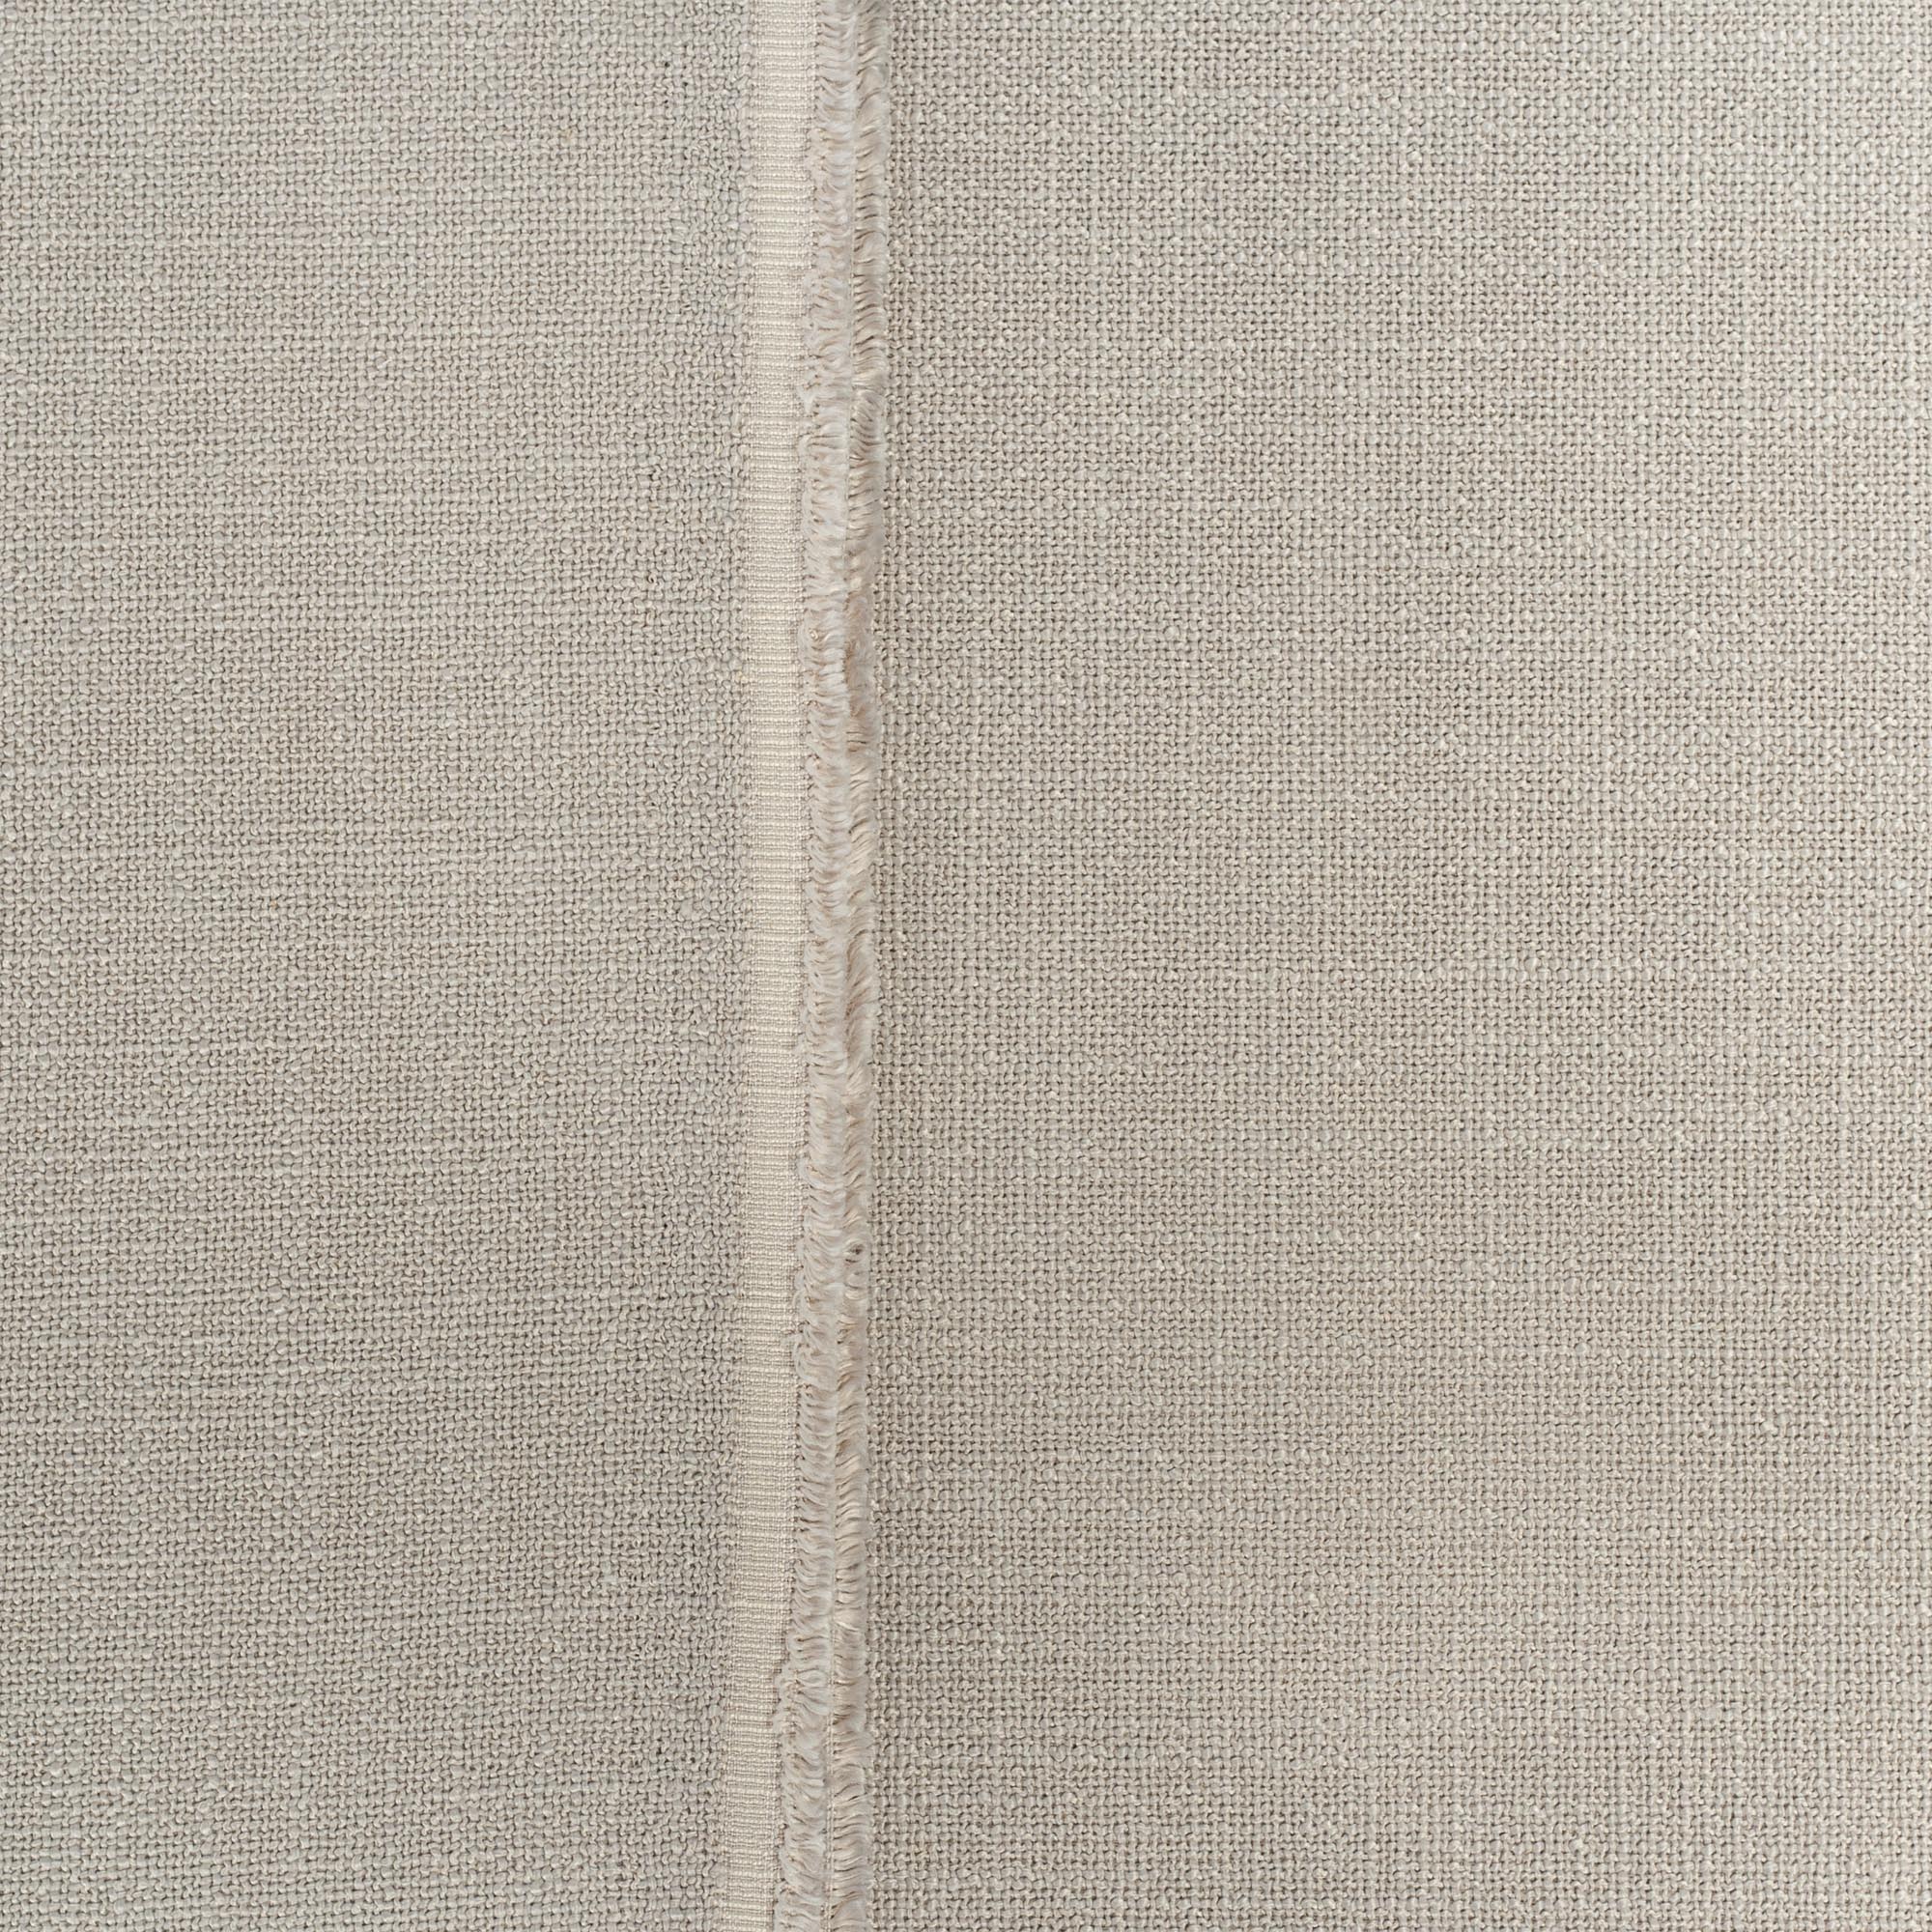 Grange Fabric Pumice, an earthy gray high performance upholstery fabric : close up view 2